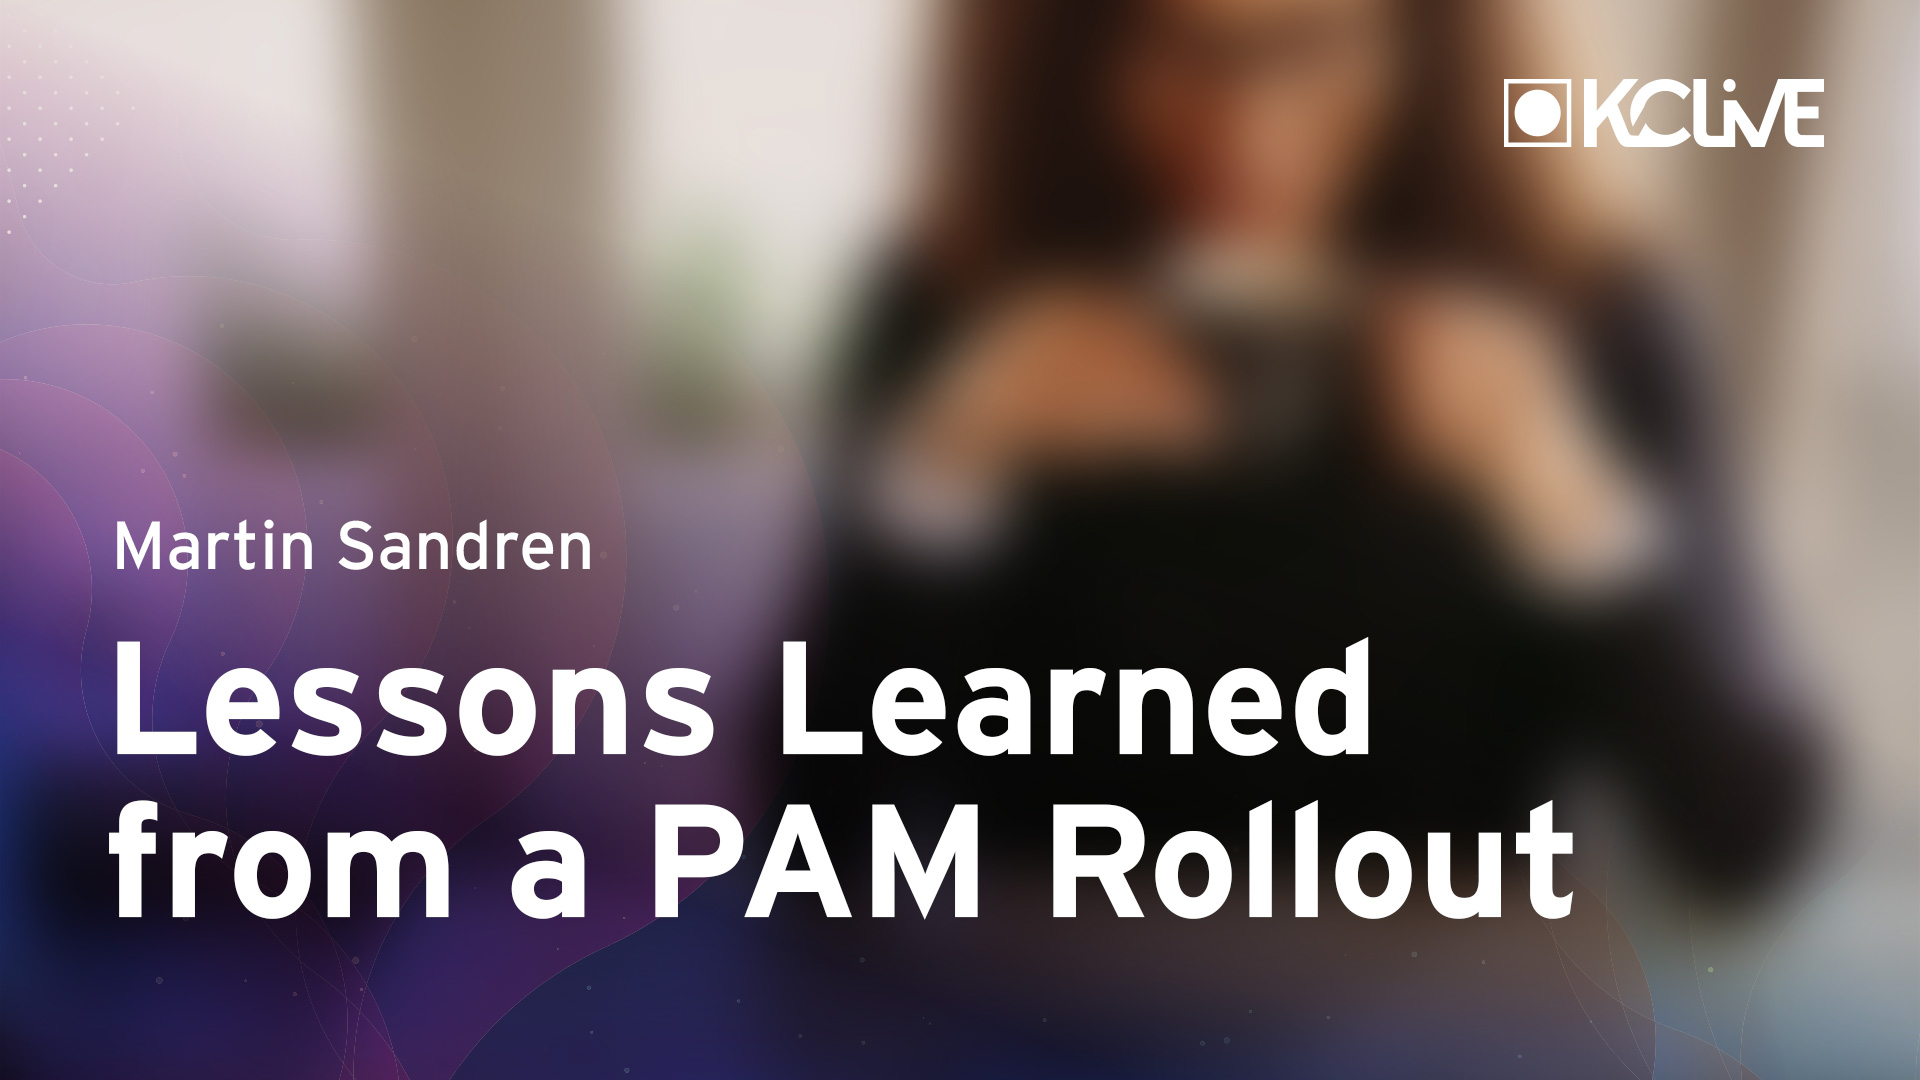 Lessons learned from a PAM rollout